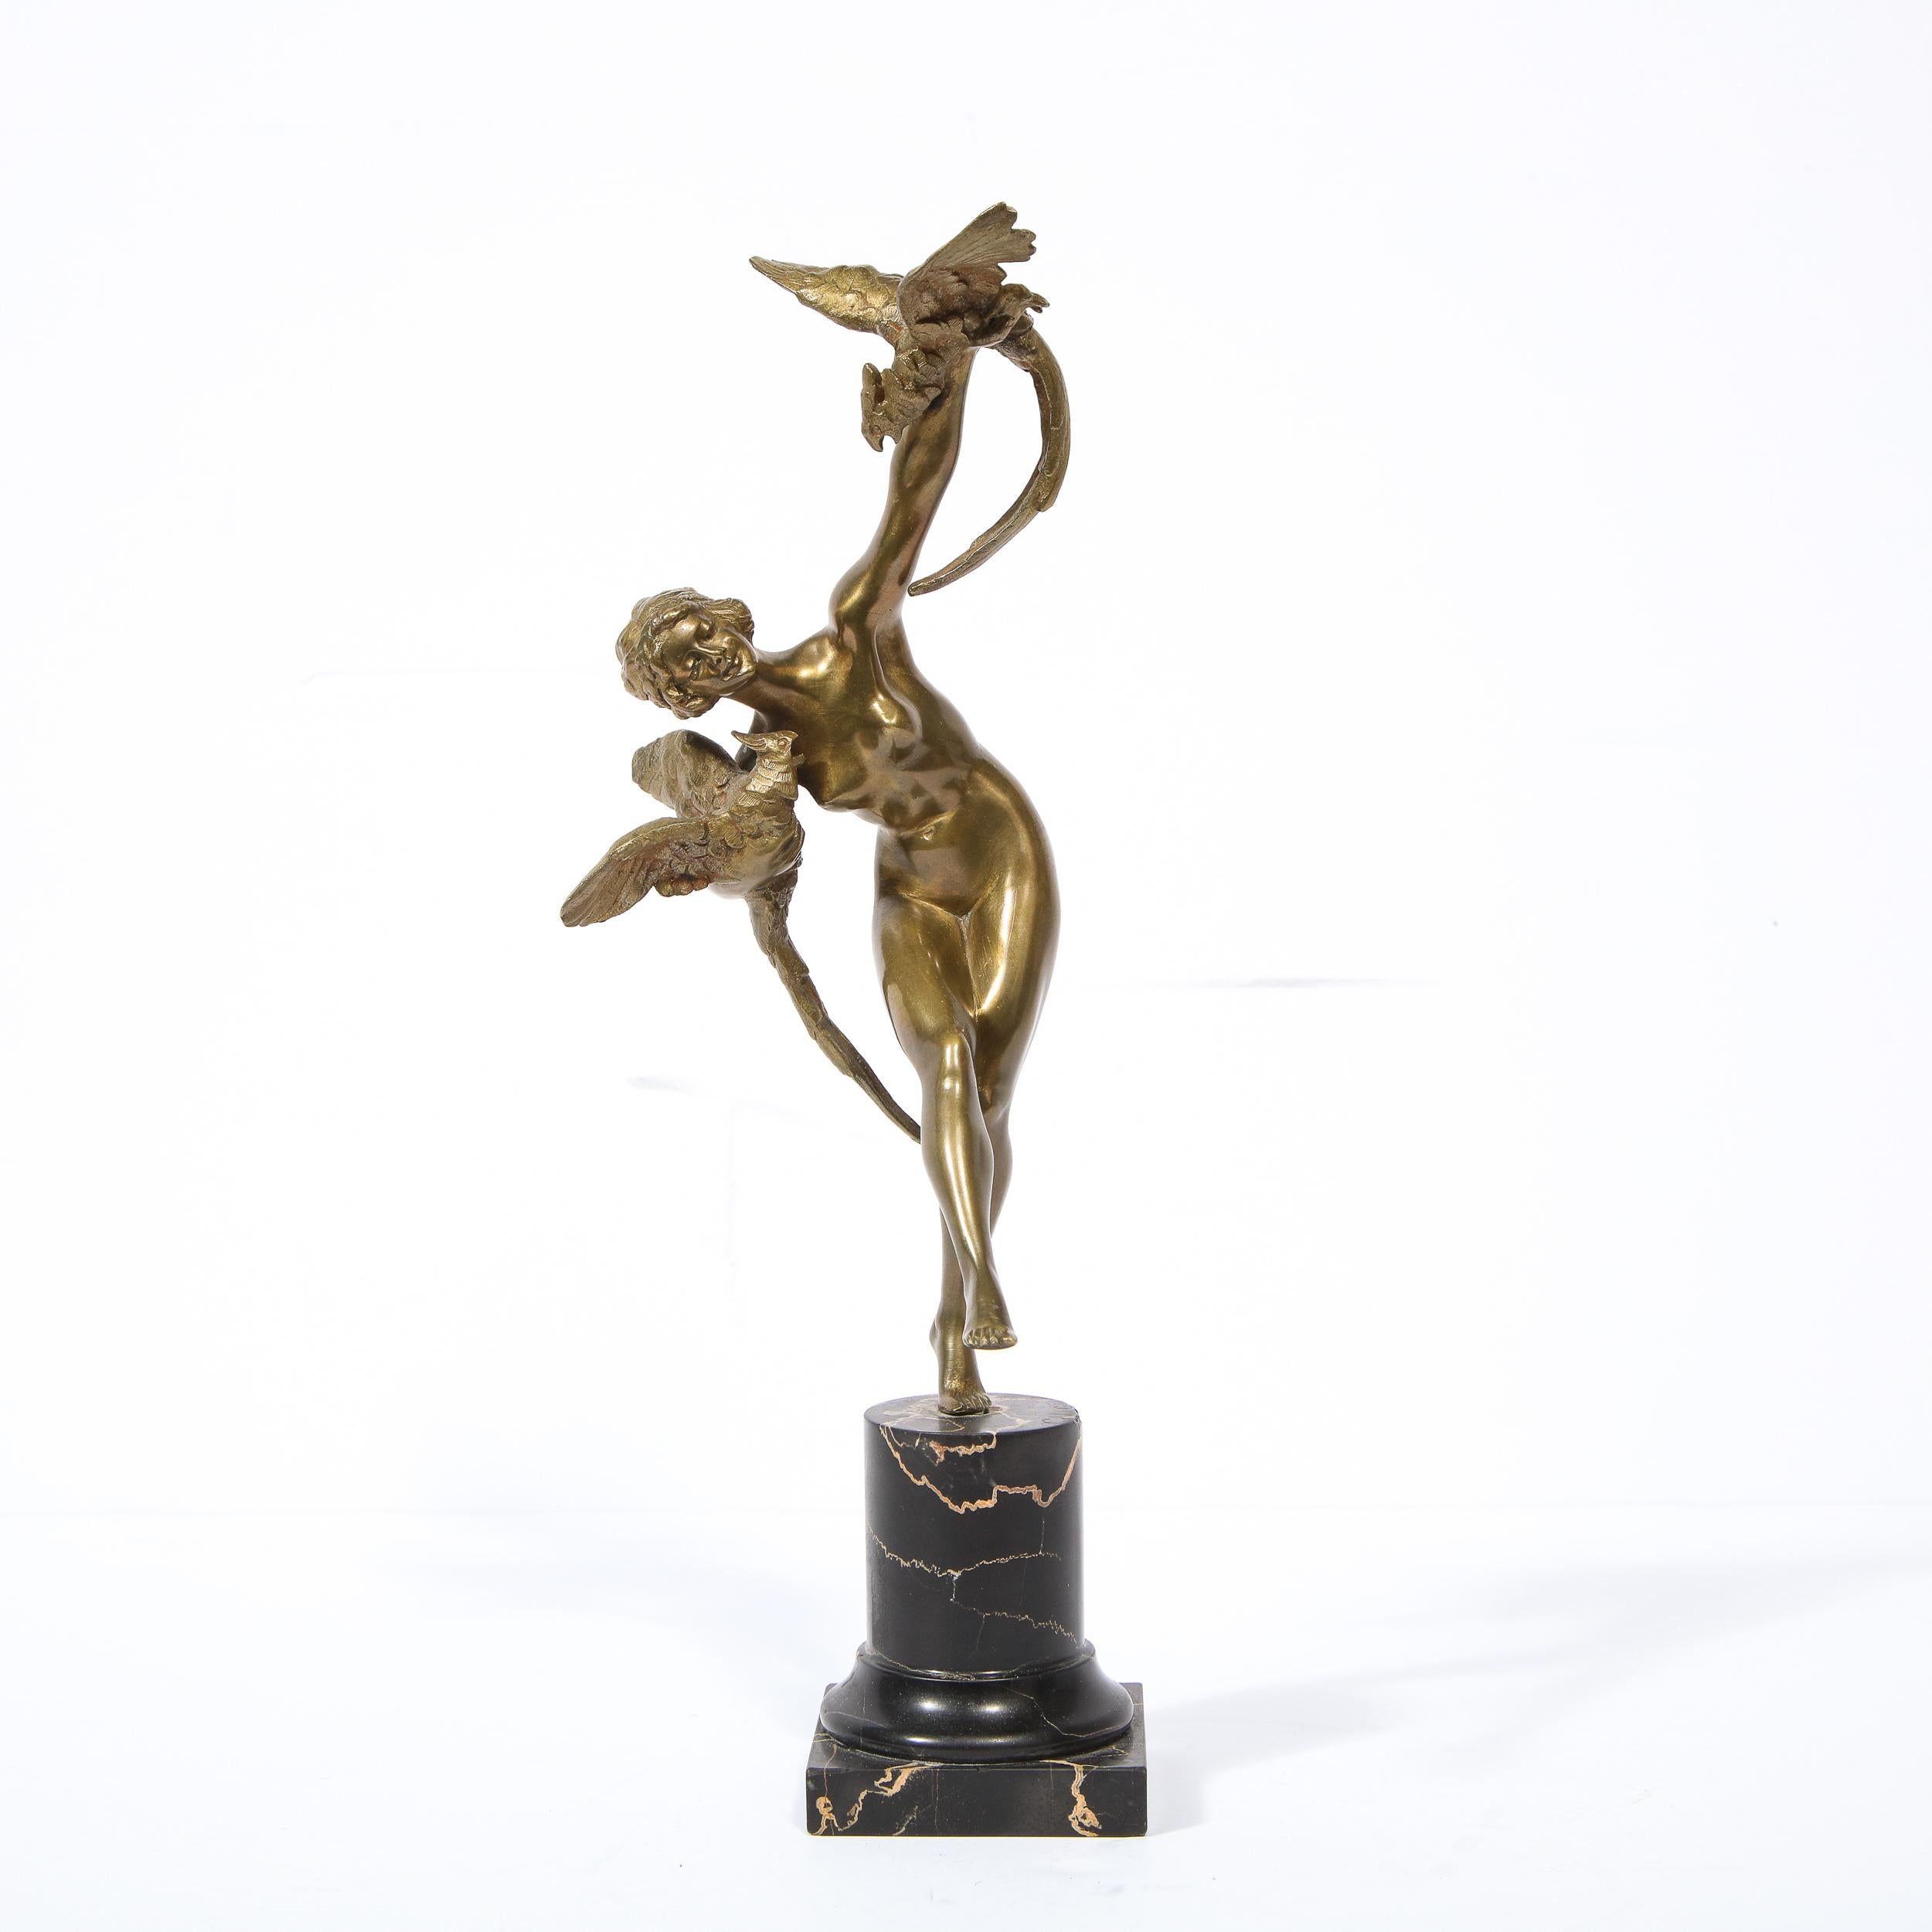 This stunning Art Deco sculpture was produced in France, circa 1930 and procured in Buenos Aires, Argentina. It features a dancing nude female form in bronze holding a pheasant in each arm. The piece sits on a cylindrical exotic black marble